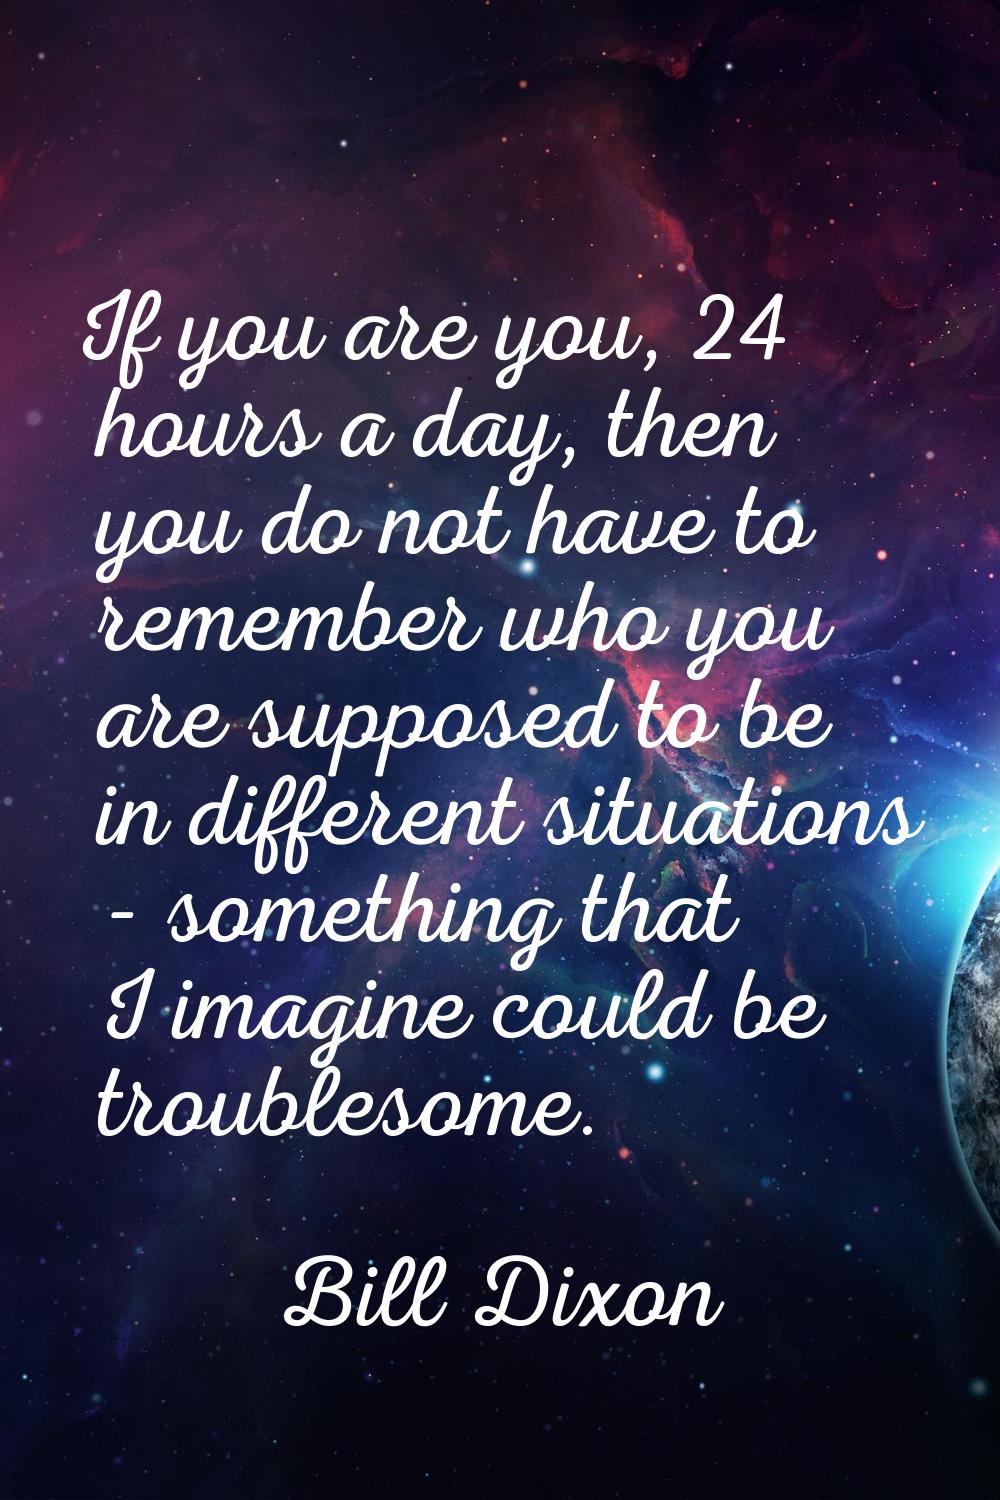 If you are you, 24 hours a day, then you do not have to remember who you are supposed to be in diff